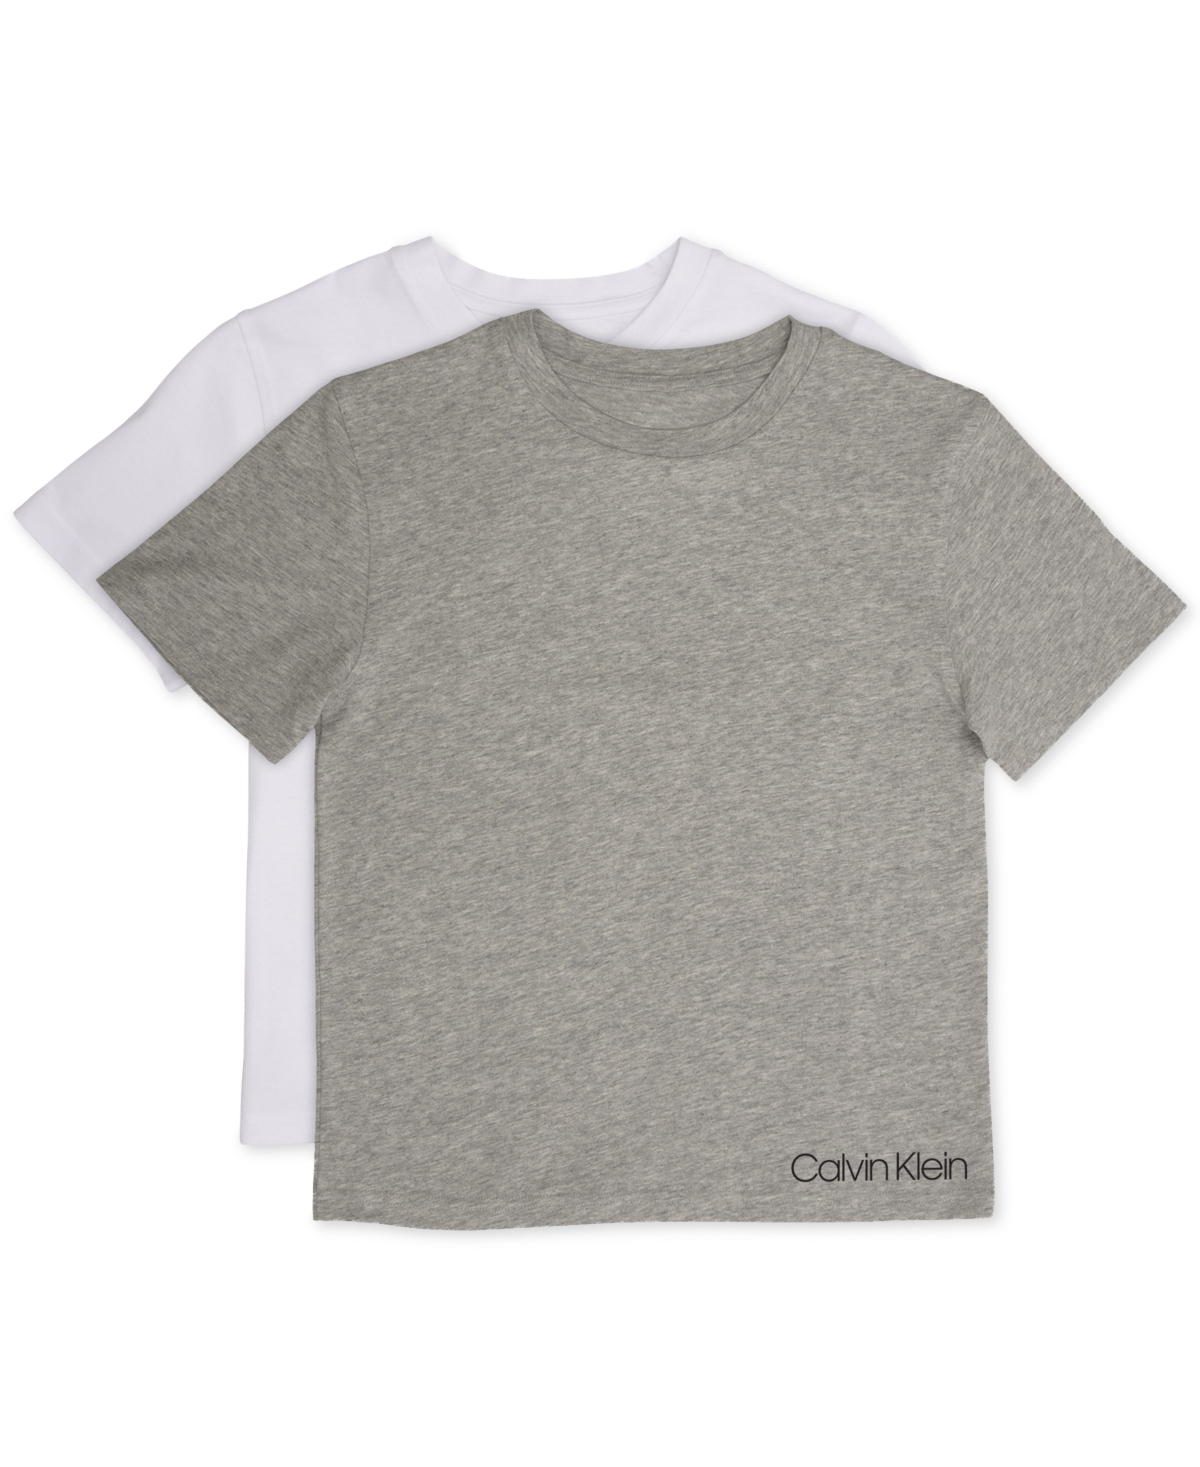 UPC 046094839973 product image for Calvin Klein Little and Big Boys' T-Shirt, 2-Pack | upcitemdb.com